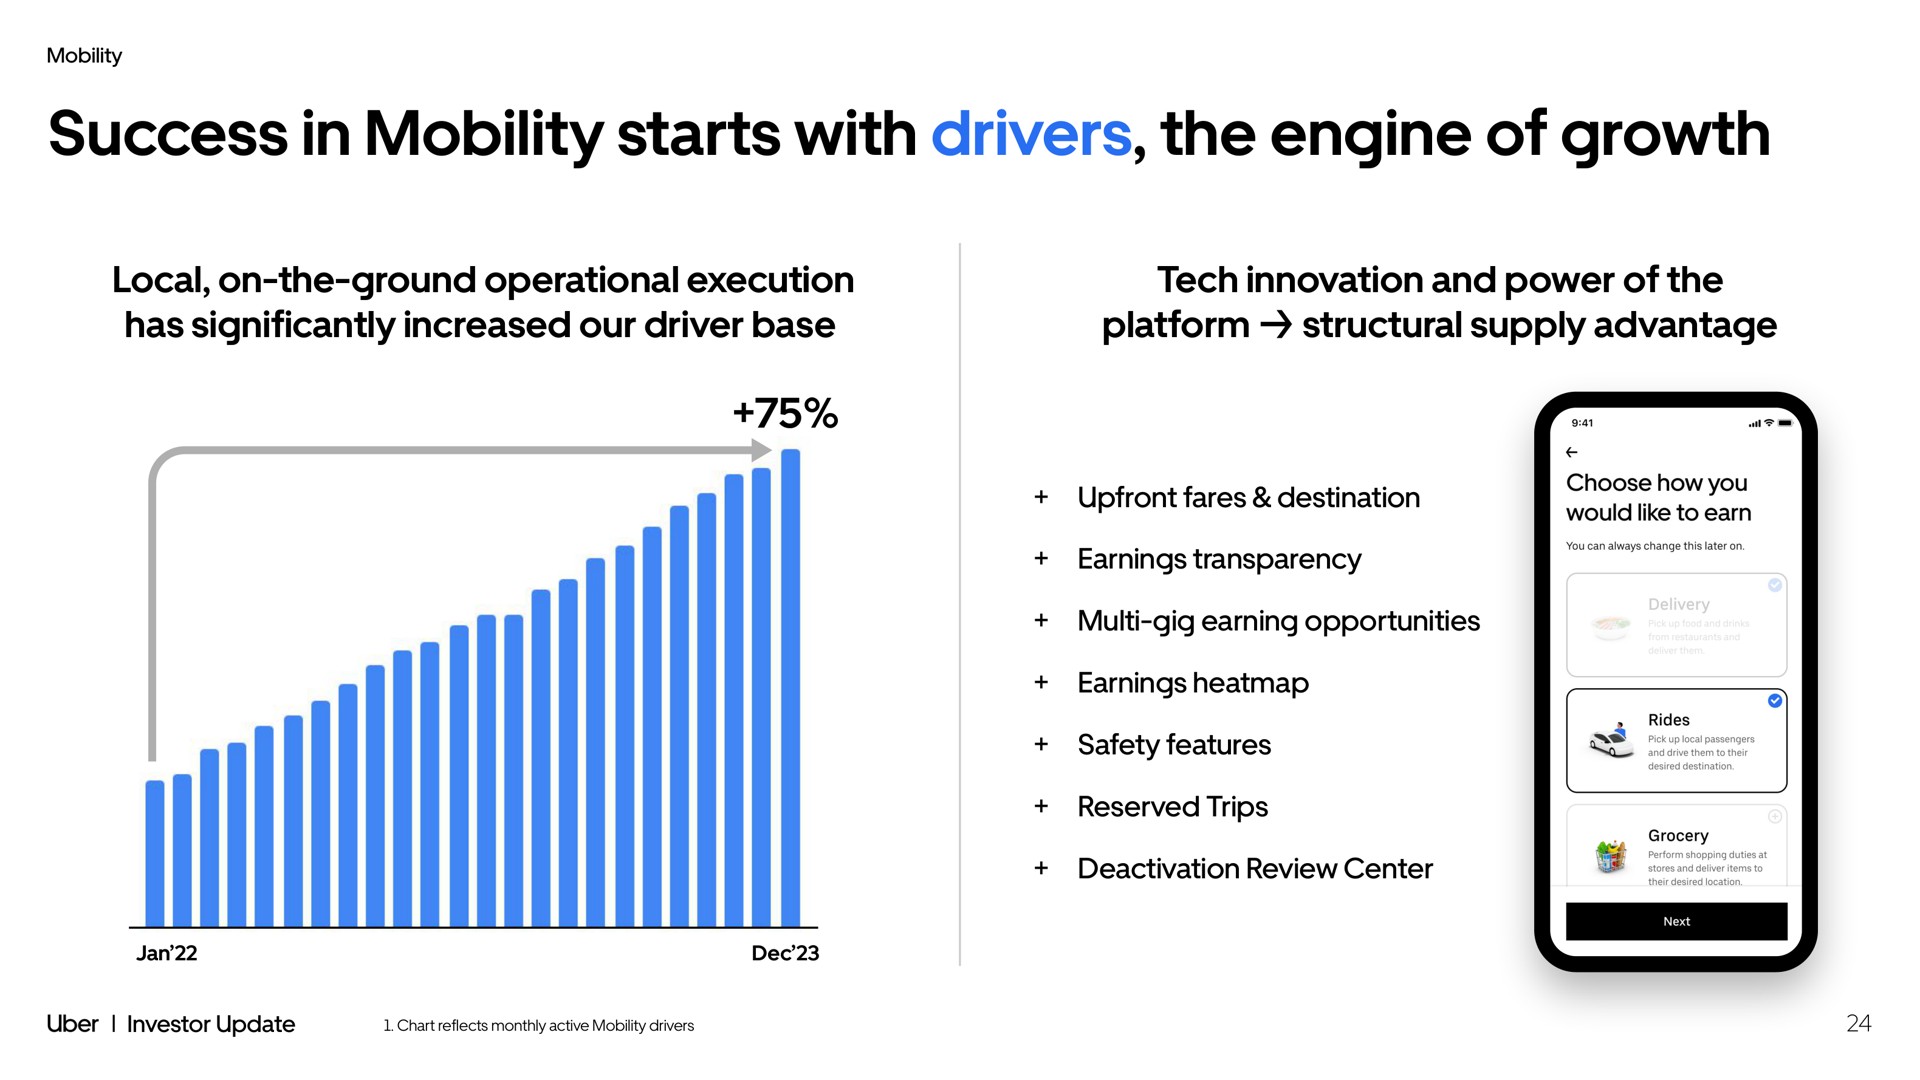 success in mobility starts with drivers the engine of growth local on the ground operational execution has significantly increased our driver base tech innovation and power of the platform structural supply advantage | Uber